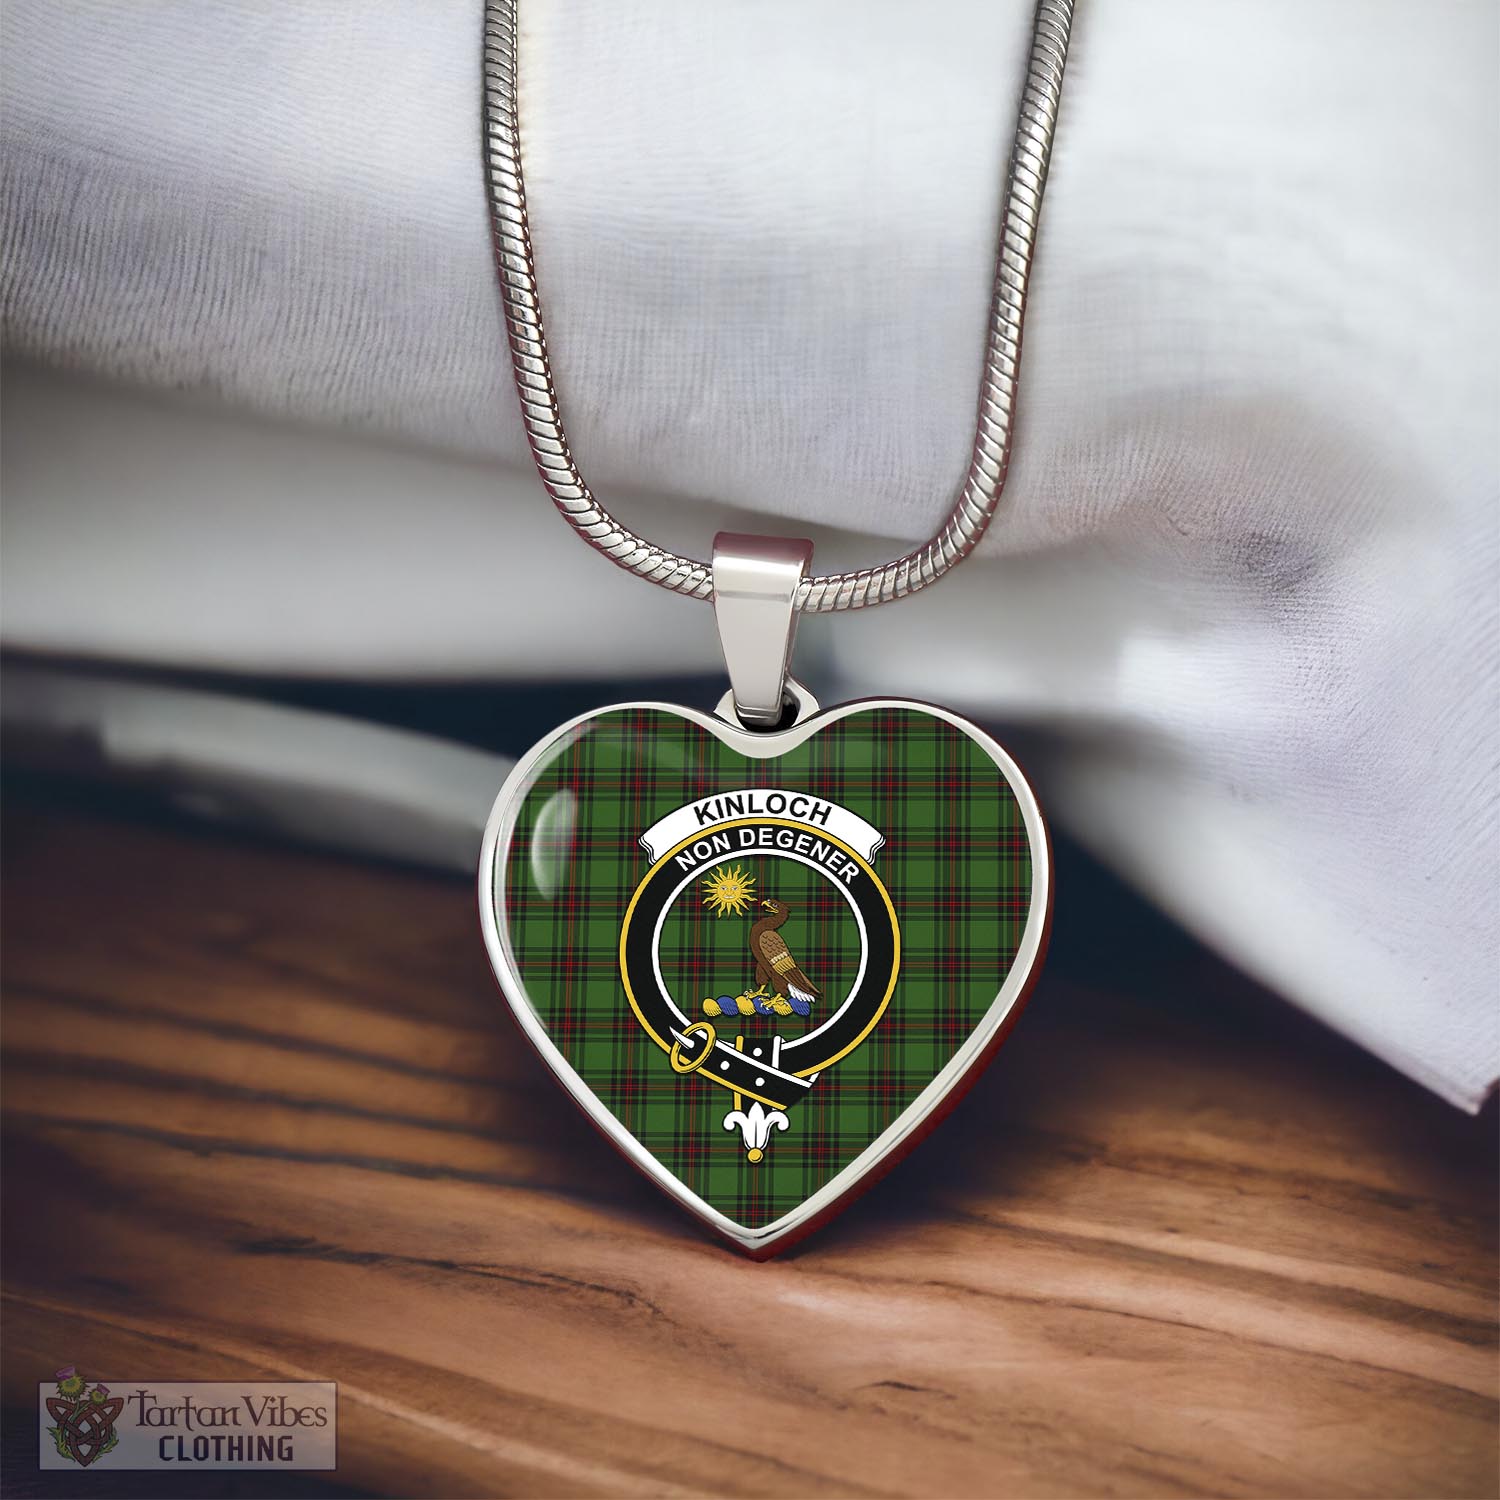 Tartan Vibes Clothing Kinloch Tartan Heart Necklace with Family Crest